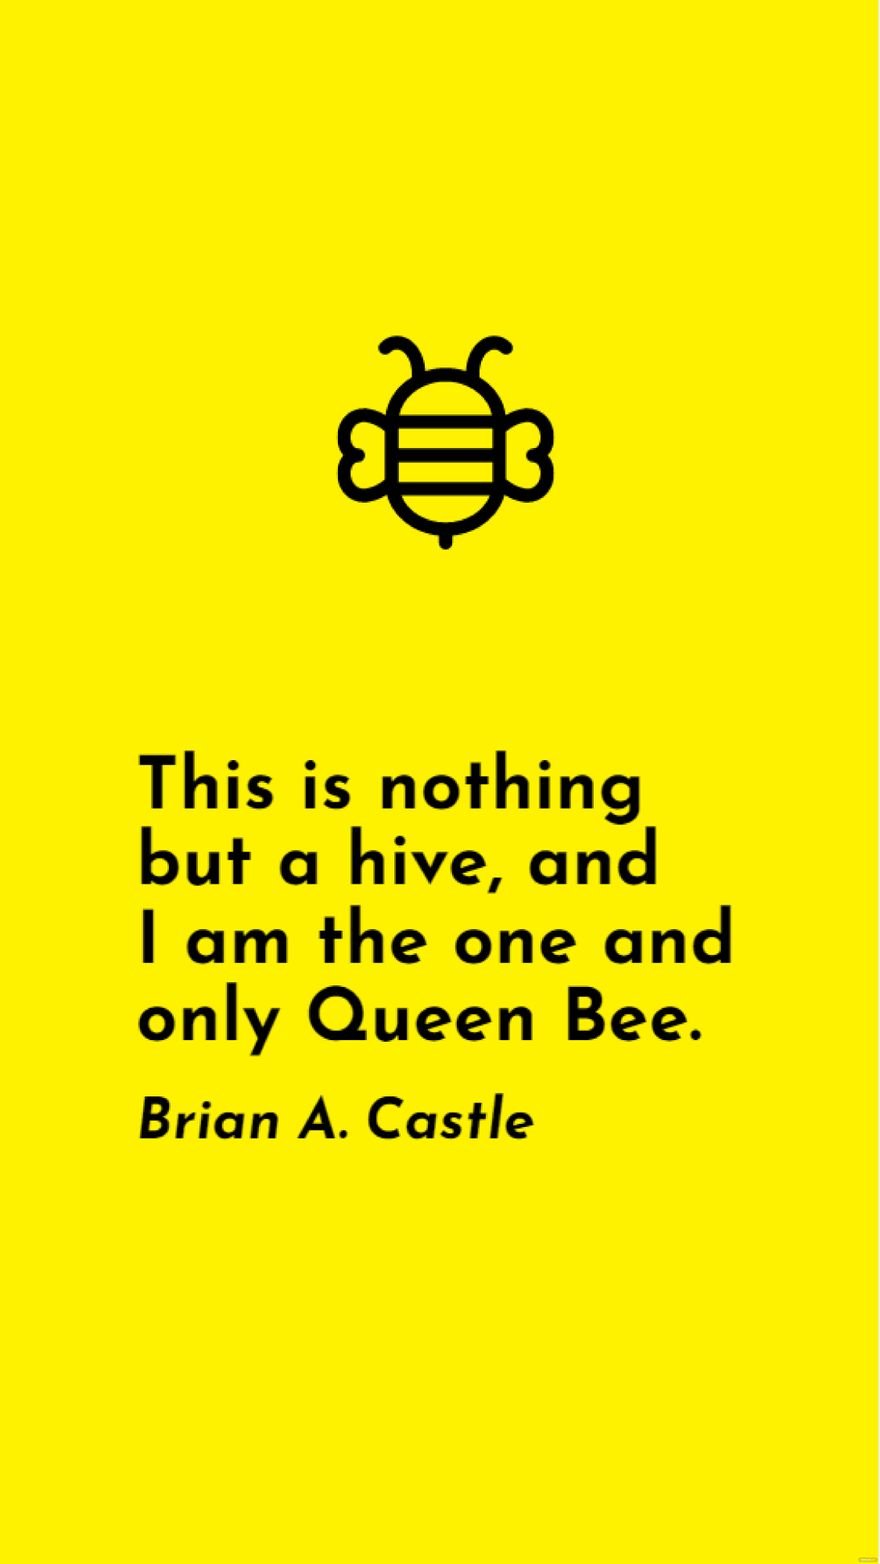 Free Brian A Castle - This is nothing but a hive, and I am the one and only Queen Bee. in JPG